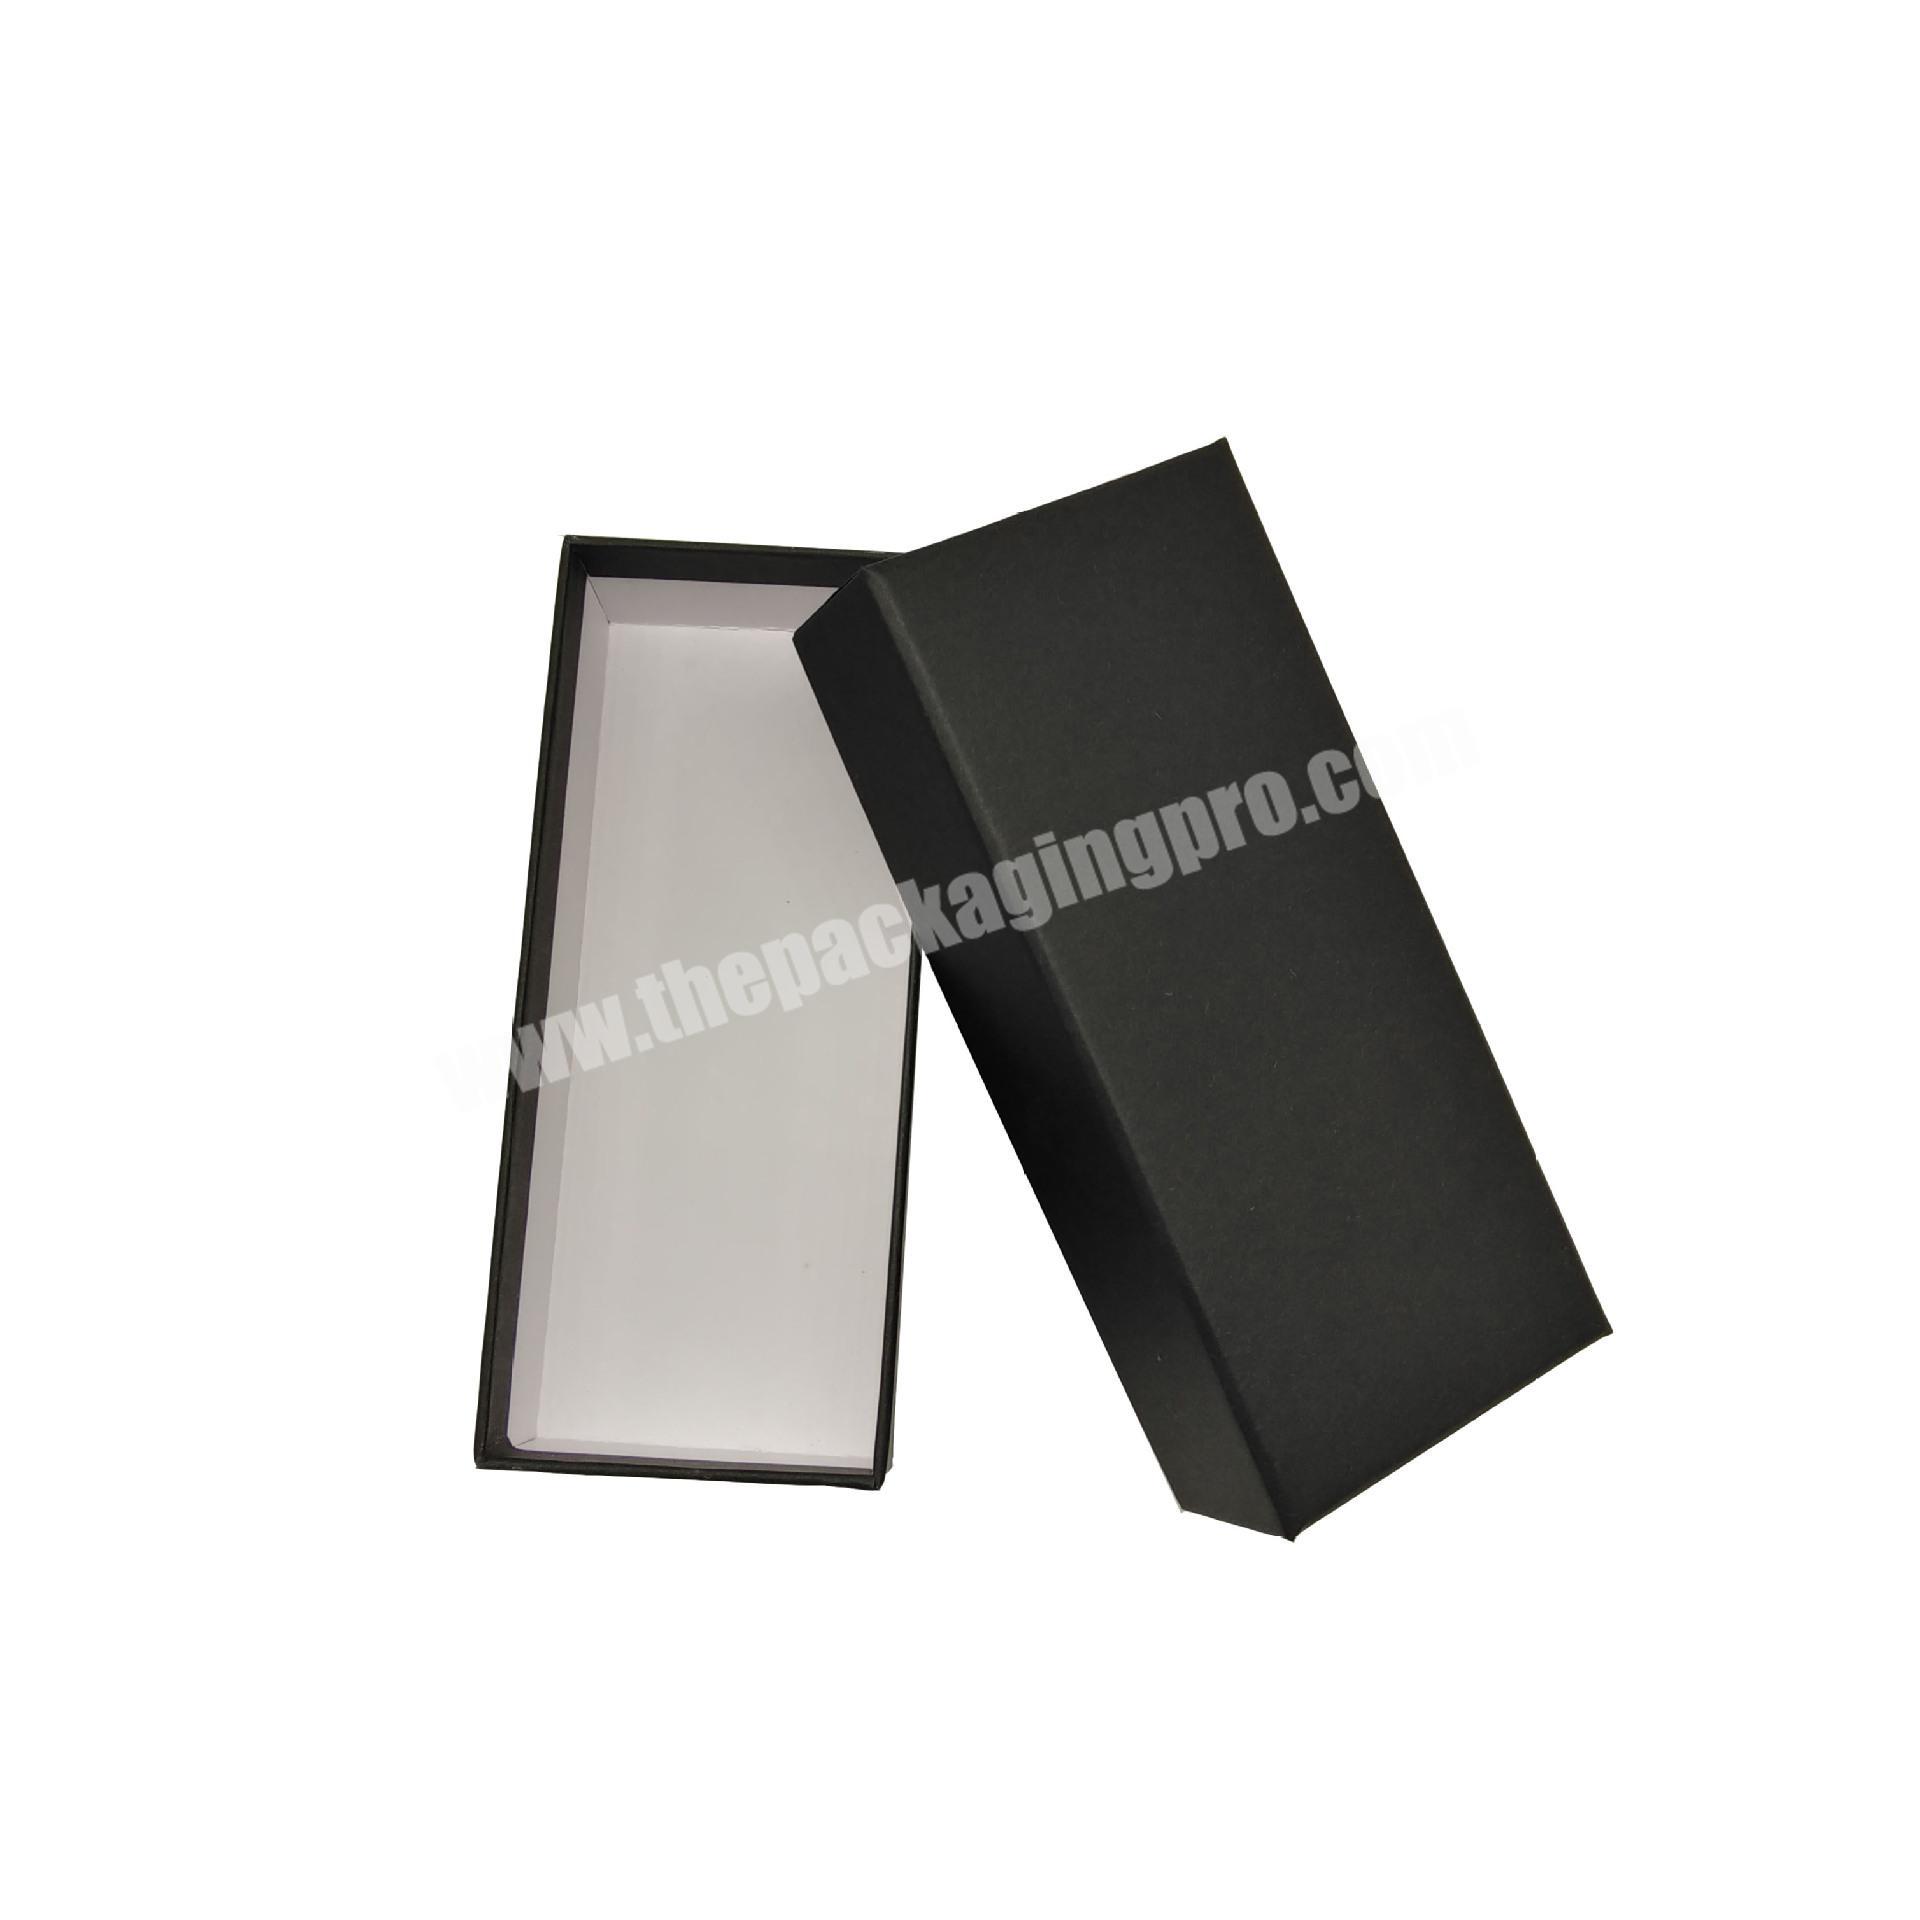 Stock Black packaging boxes logo customized lid and base gift box with logo